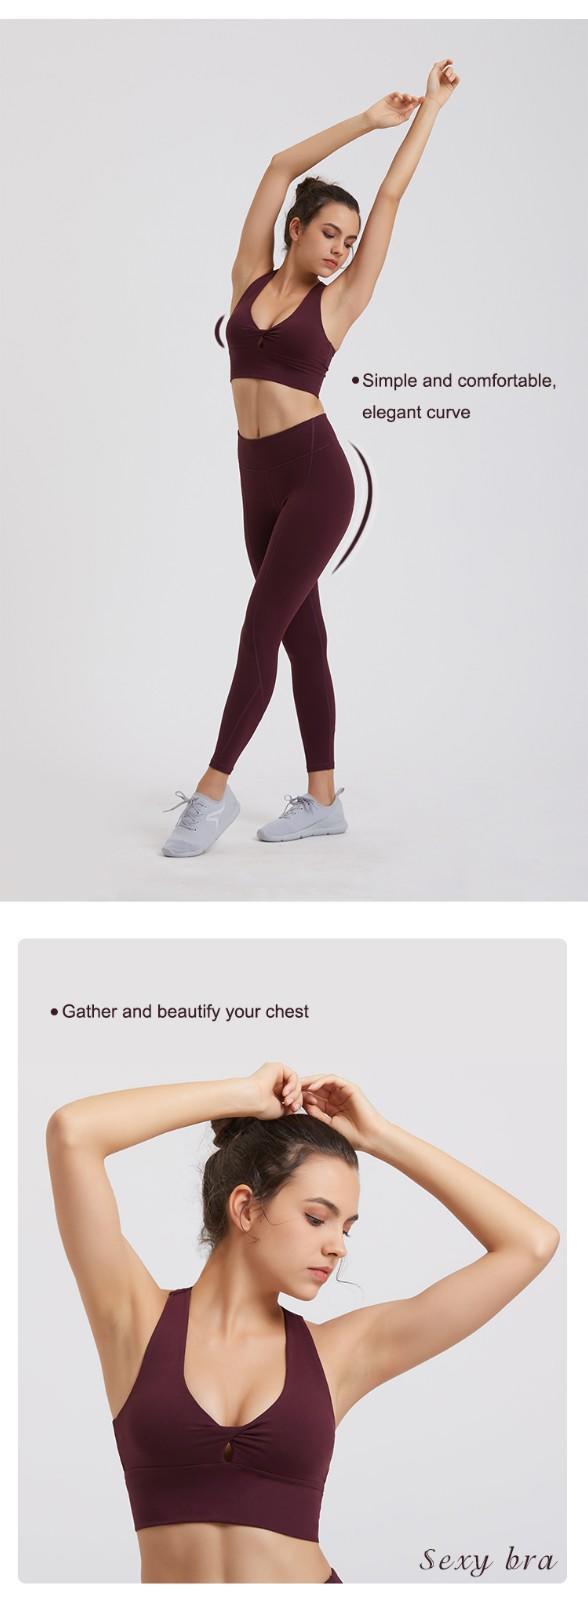 INGOR high quality stylish yoga outfits overseas market for ladies